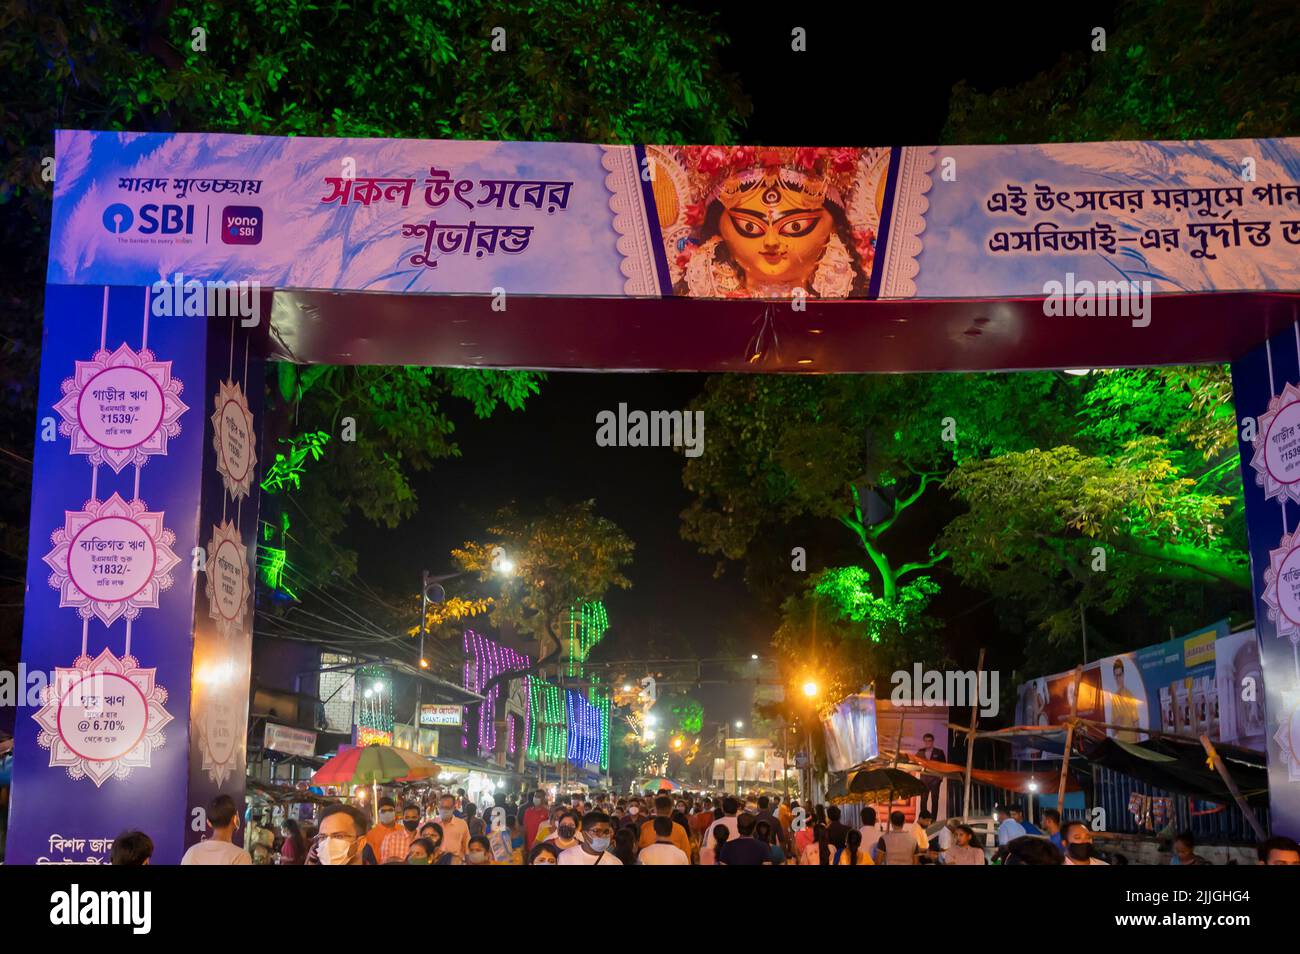 Kolkata, West Bengal, India - 12th October 2021 : Huge welcome gate for Bagbazar Durga Puja, UNESCO Intangible cultural heritage of humanity. Stock Photo